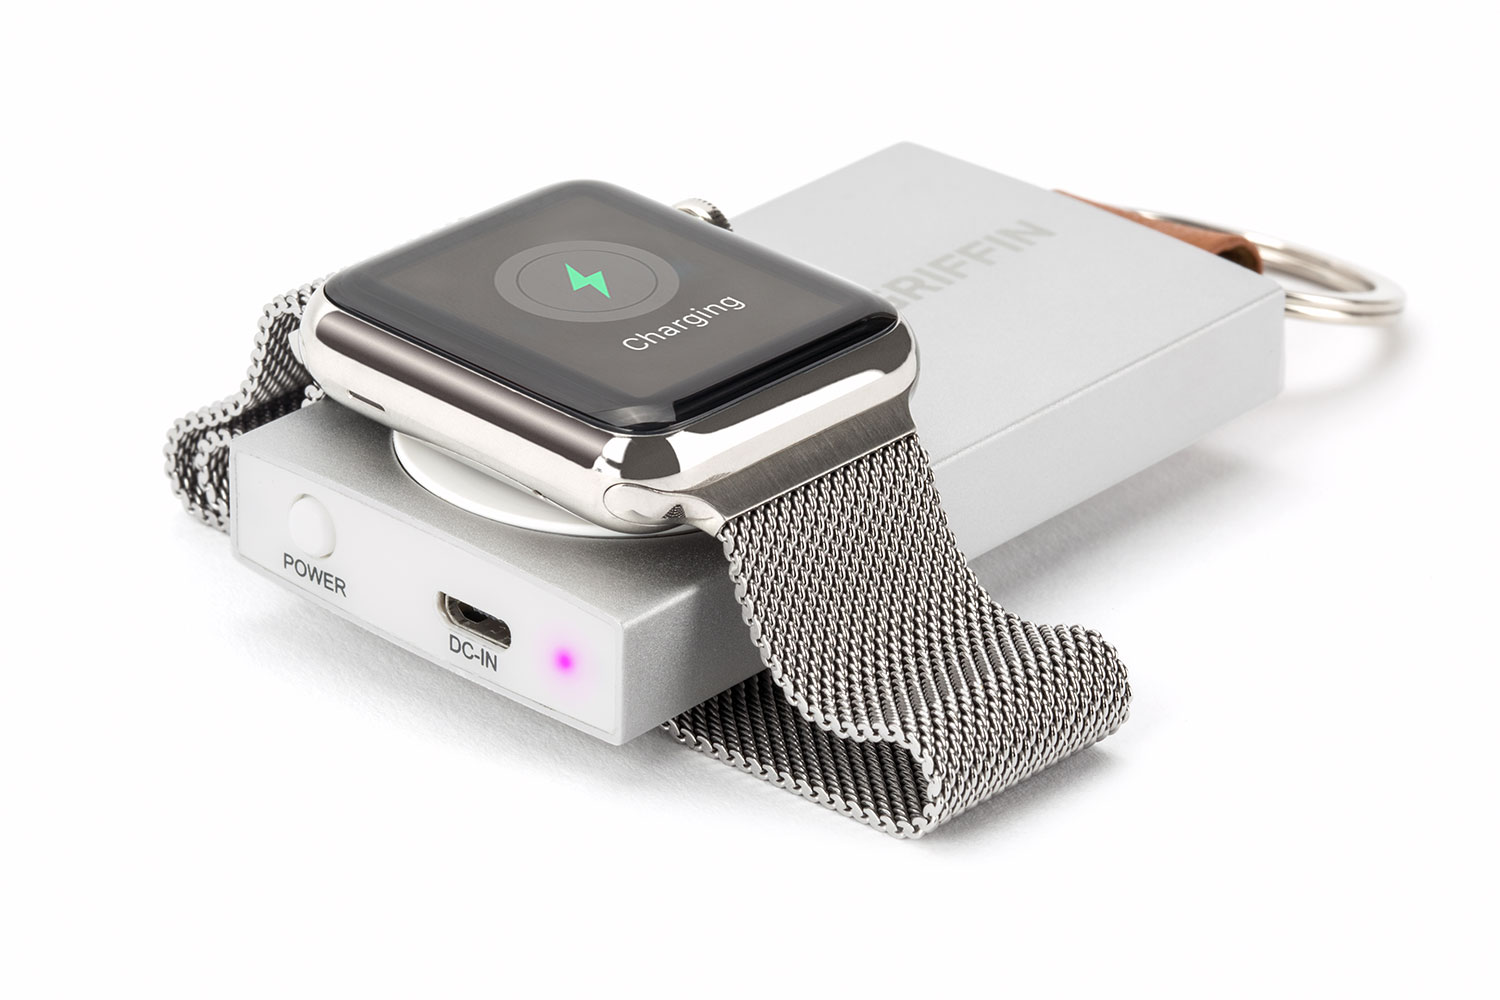 Griffin Travel Power Bank